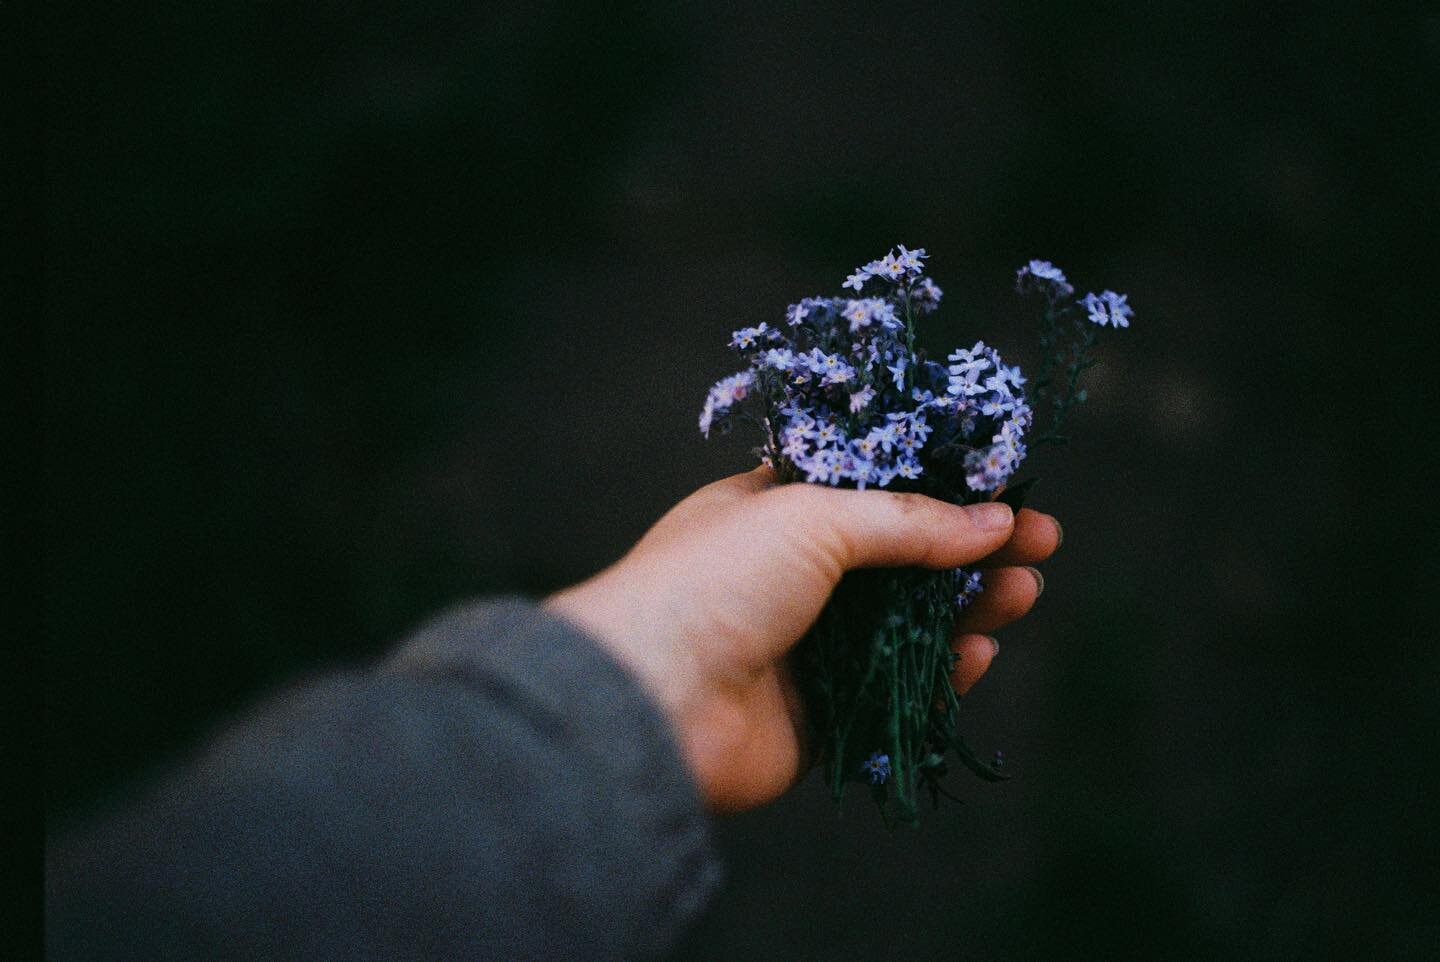 Forget me not 
#analog #35mm